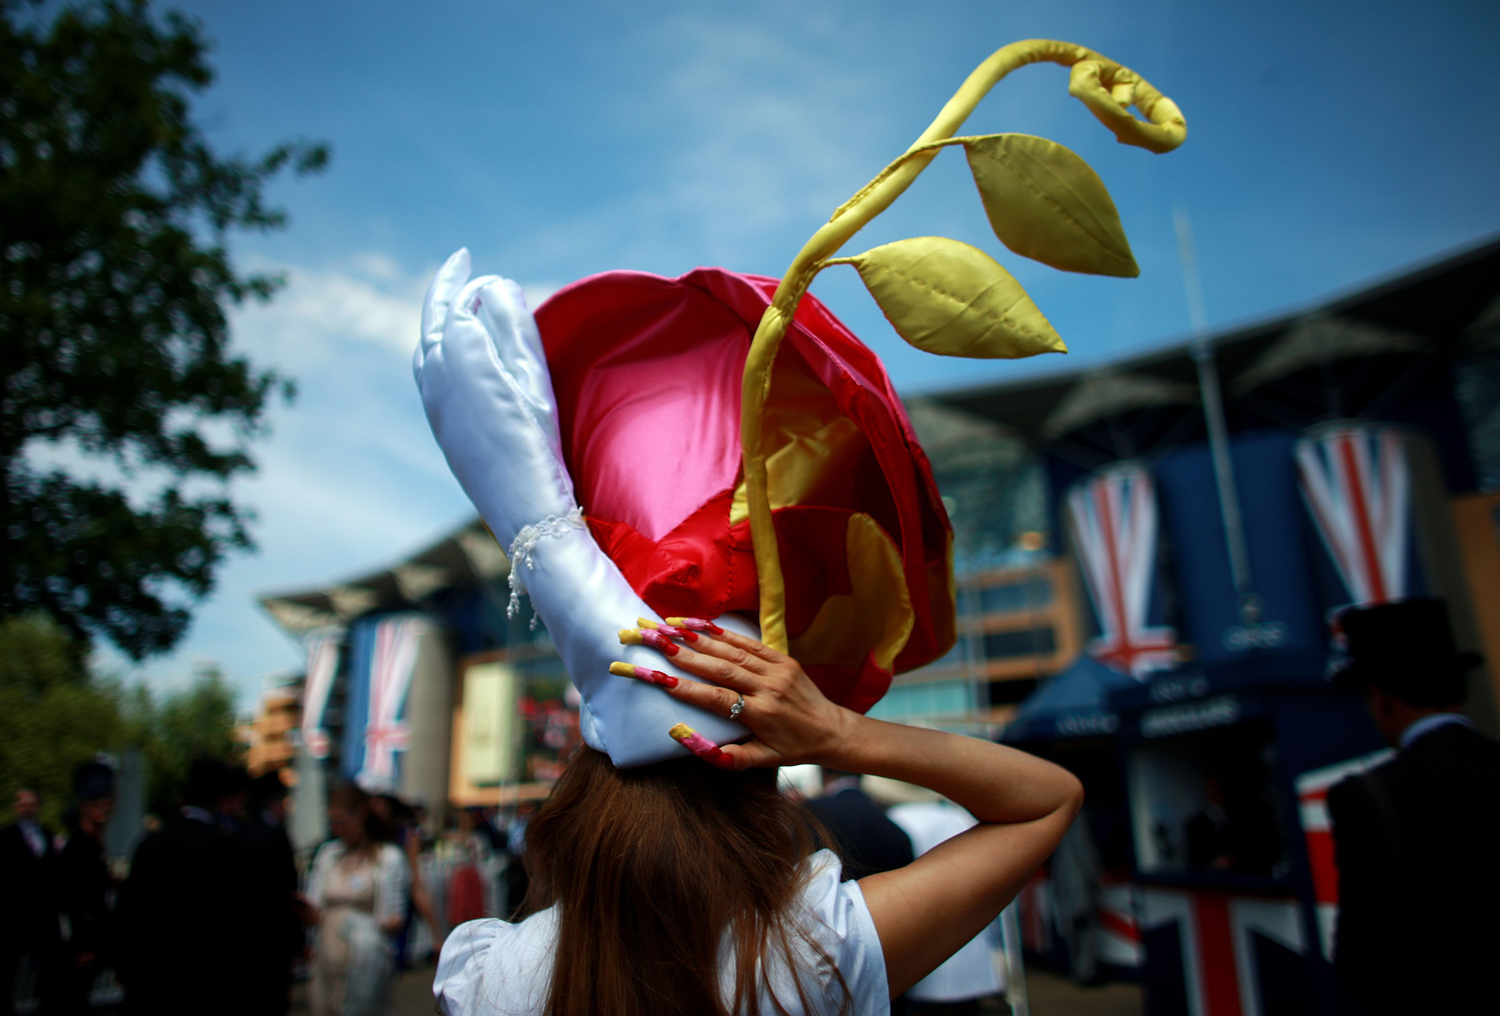 HORSE RACING - THE ROYAL ASCOT MEETING 2014 - DAY ONE - ASCOT RACECOURSE